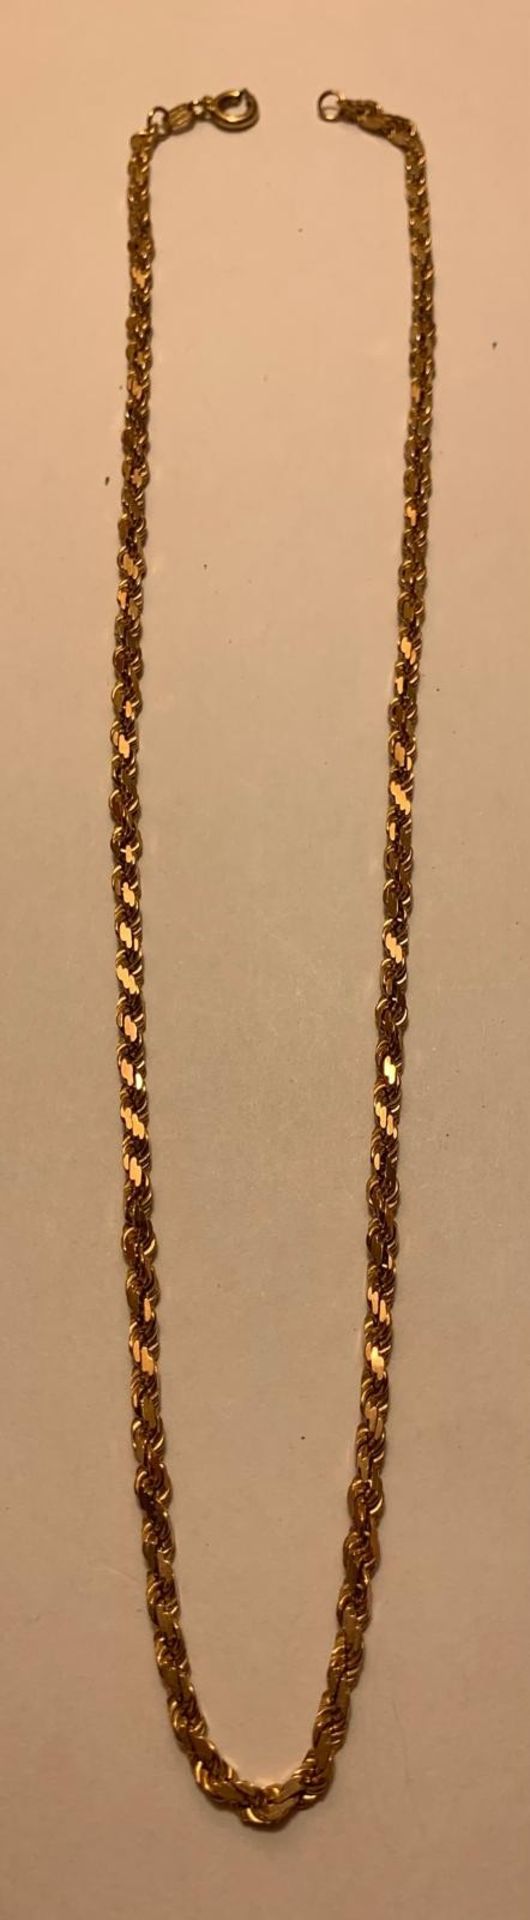 9ct GOLD CHAIN, APPROX 50.5cm LONG AND WEIGHT APPROX 11.86g CLASP DAMAGED - Image 2 of 4